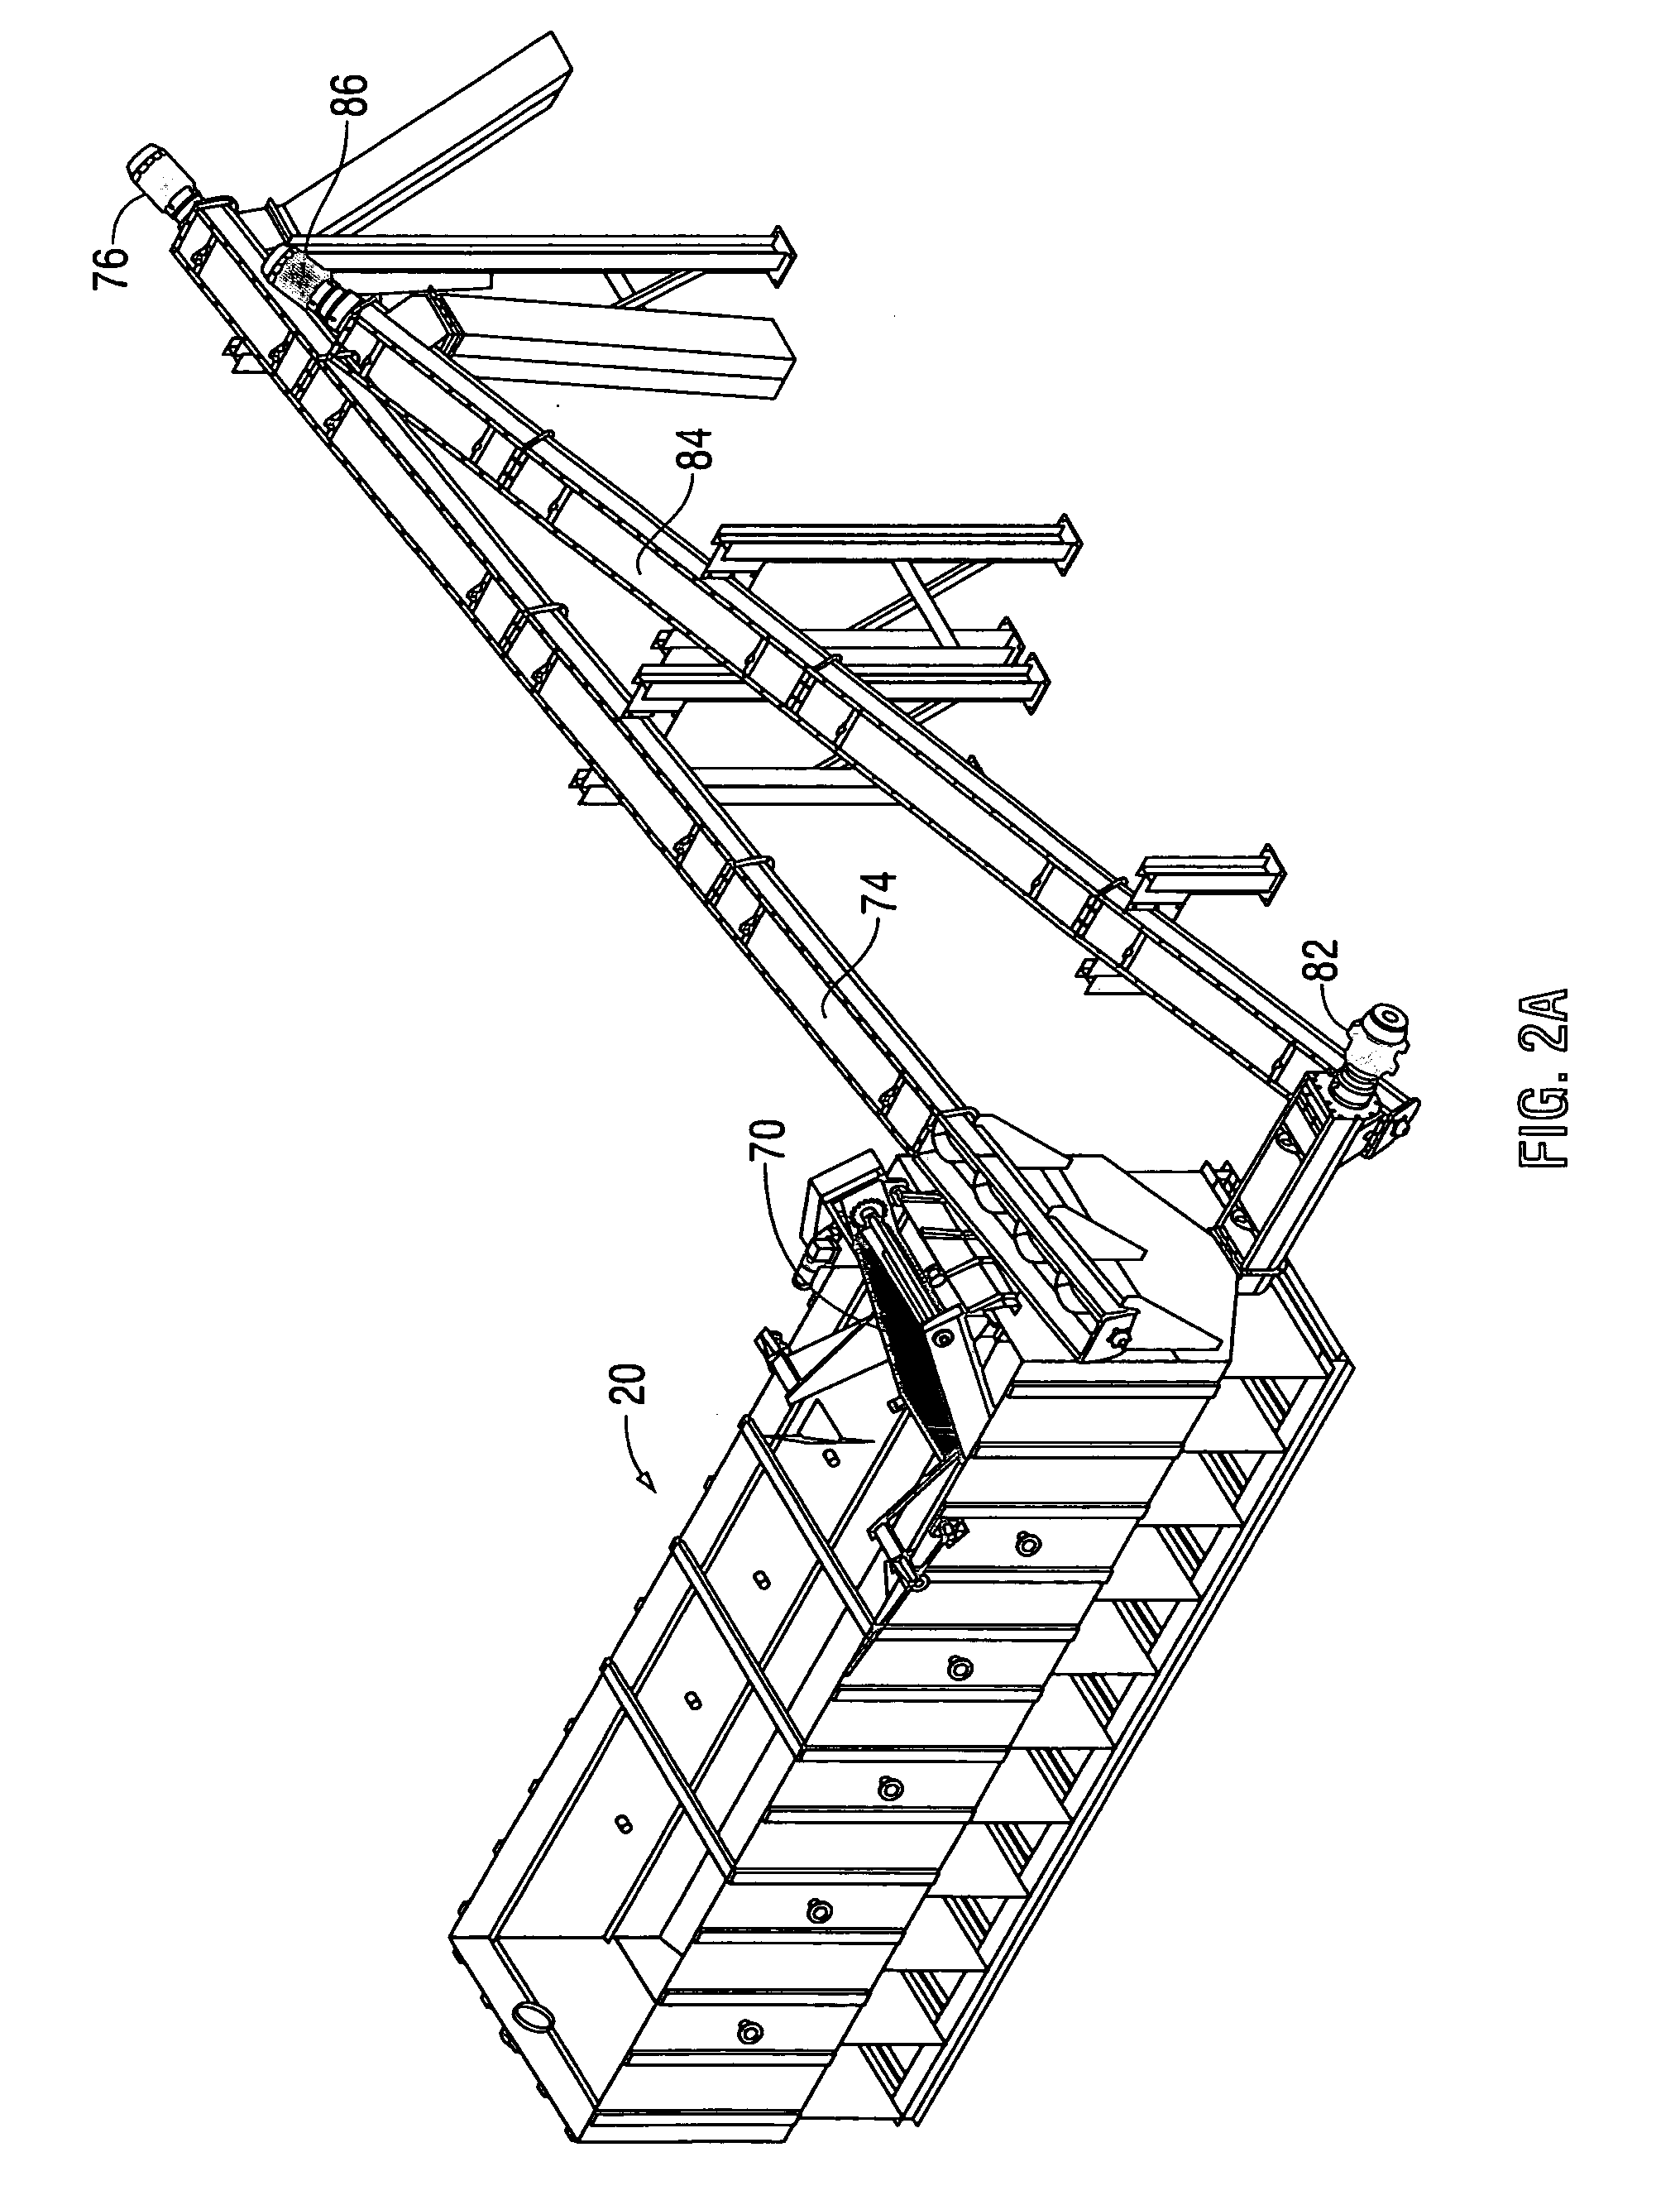 System and method for separation and handling of construction, demolition and garbage materials